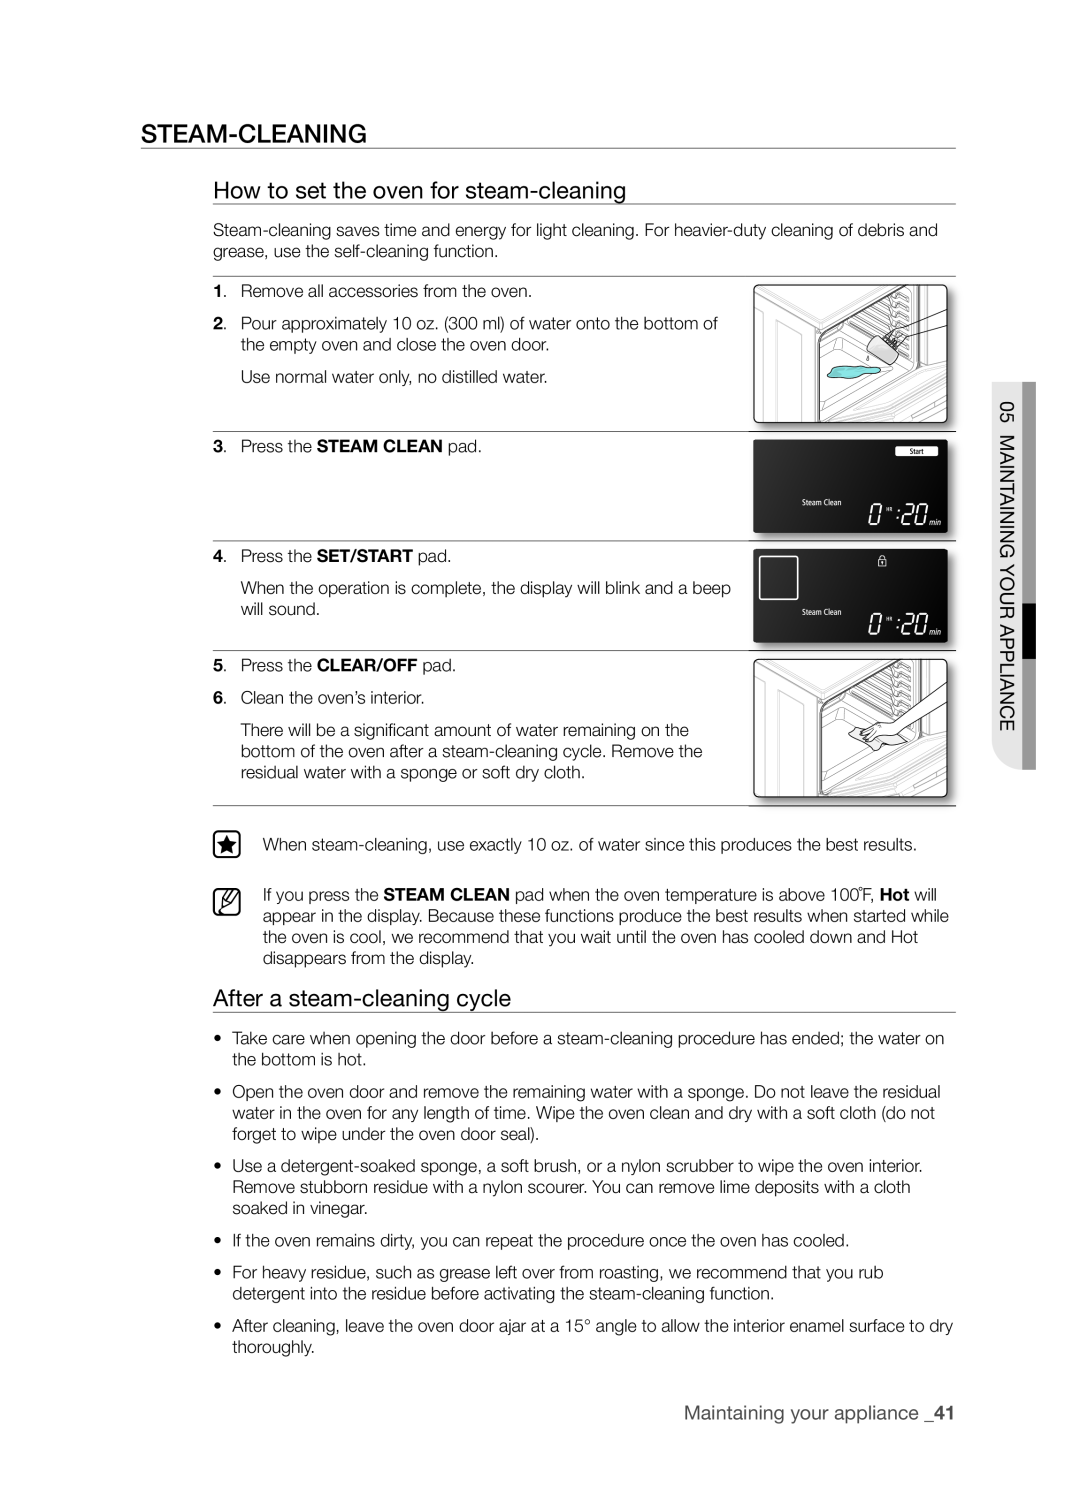 Samsung FTQ386LWUX user manual Steam-Cleaning, How to set the oven for steam-cleaning, After a steam-cleaning cycle 